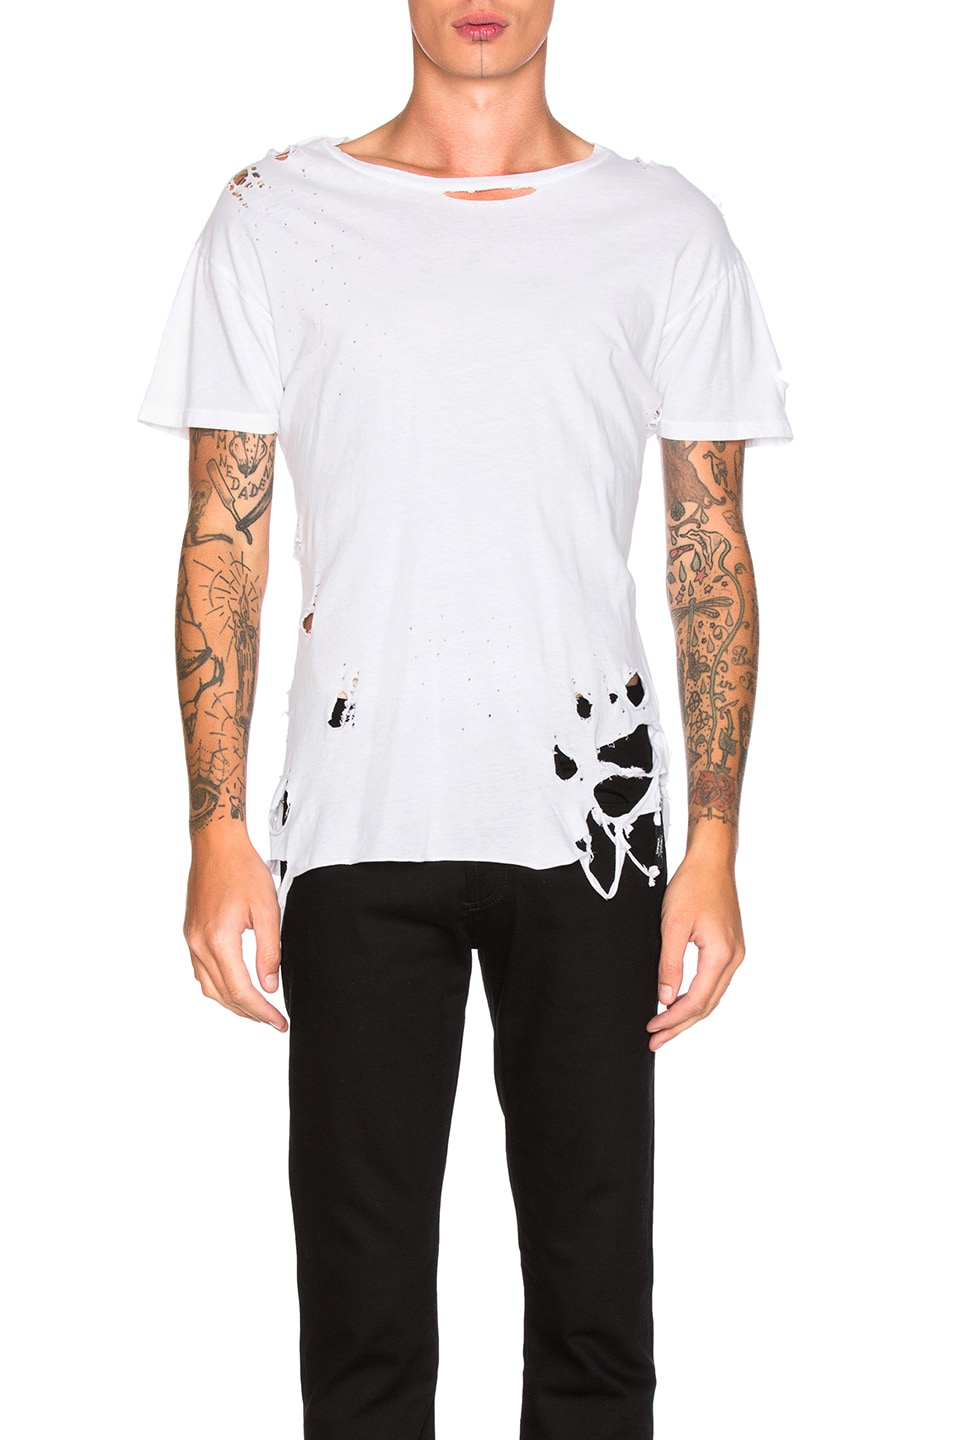 Image 1 of Enfants Riches Deprimes Perfect Shredded Tee in White